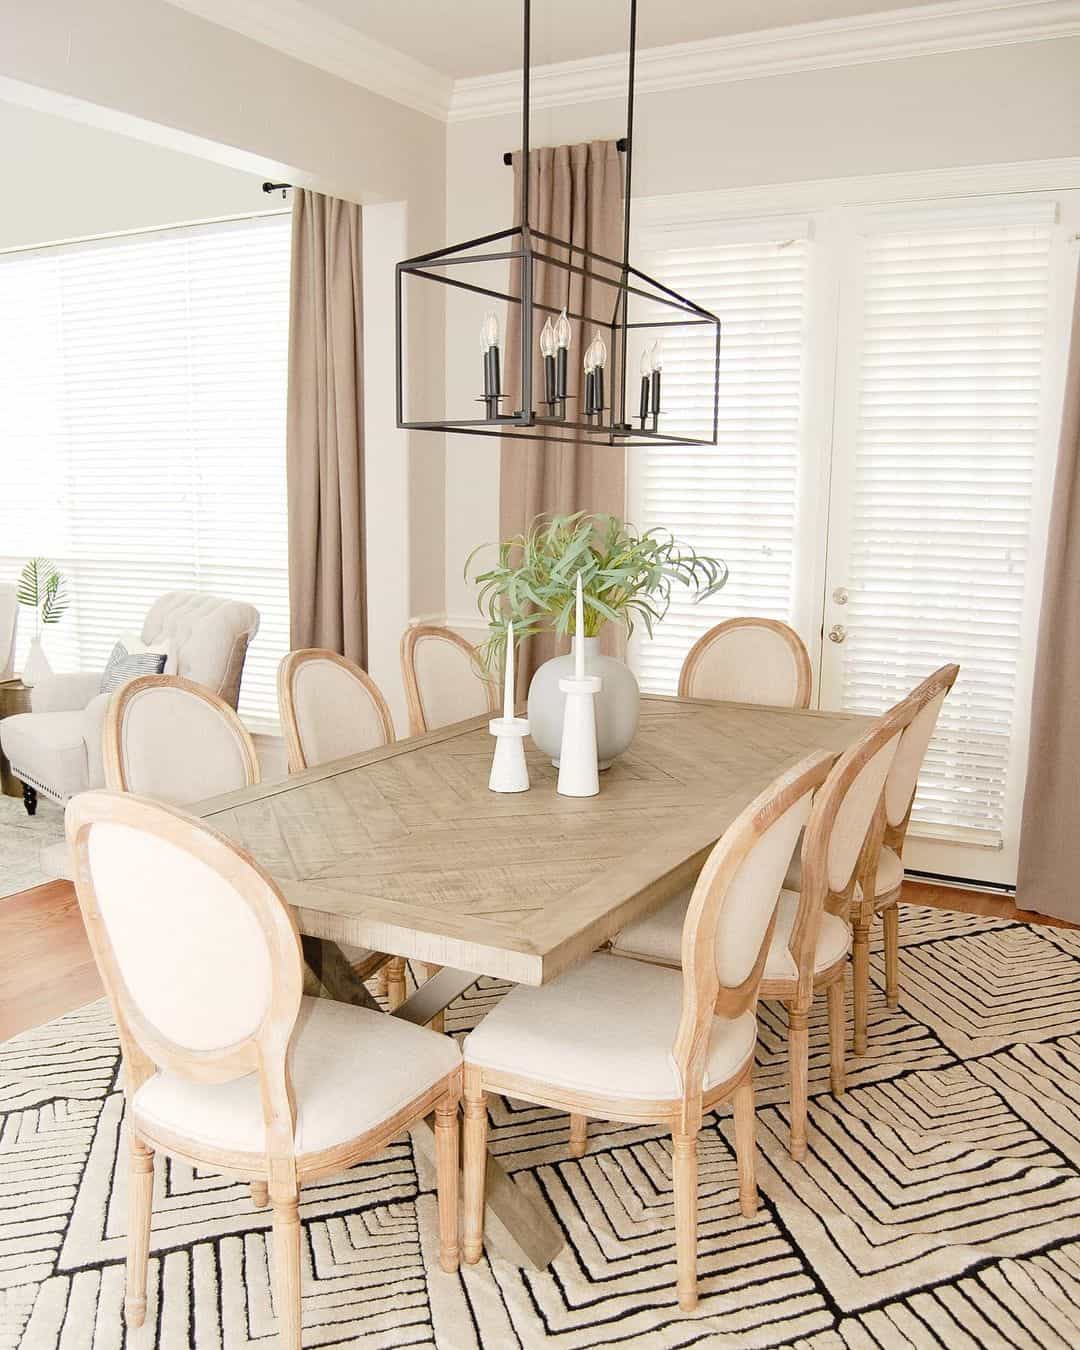 Chevron Patterned Rug Beneath Dining Table - Soul & Lane